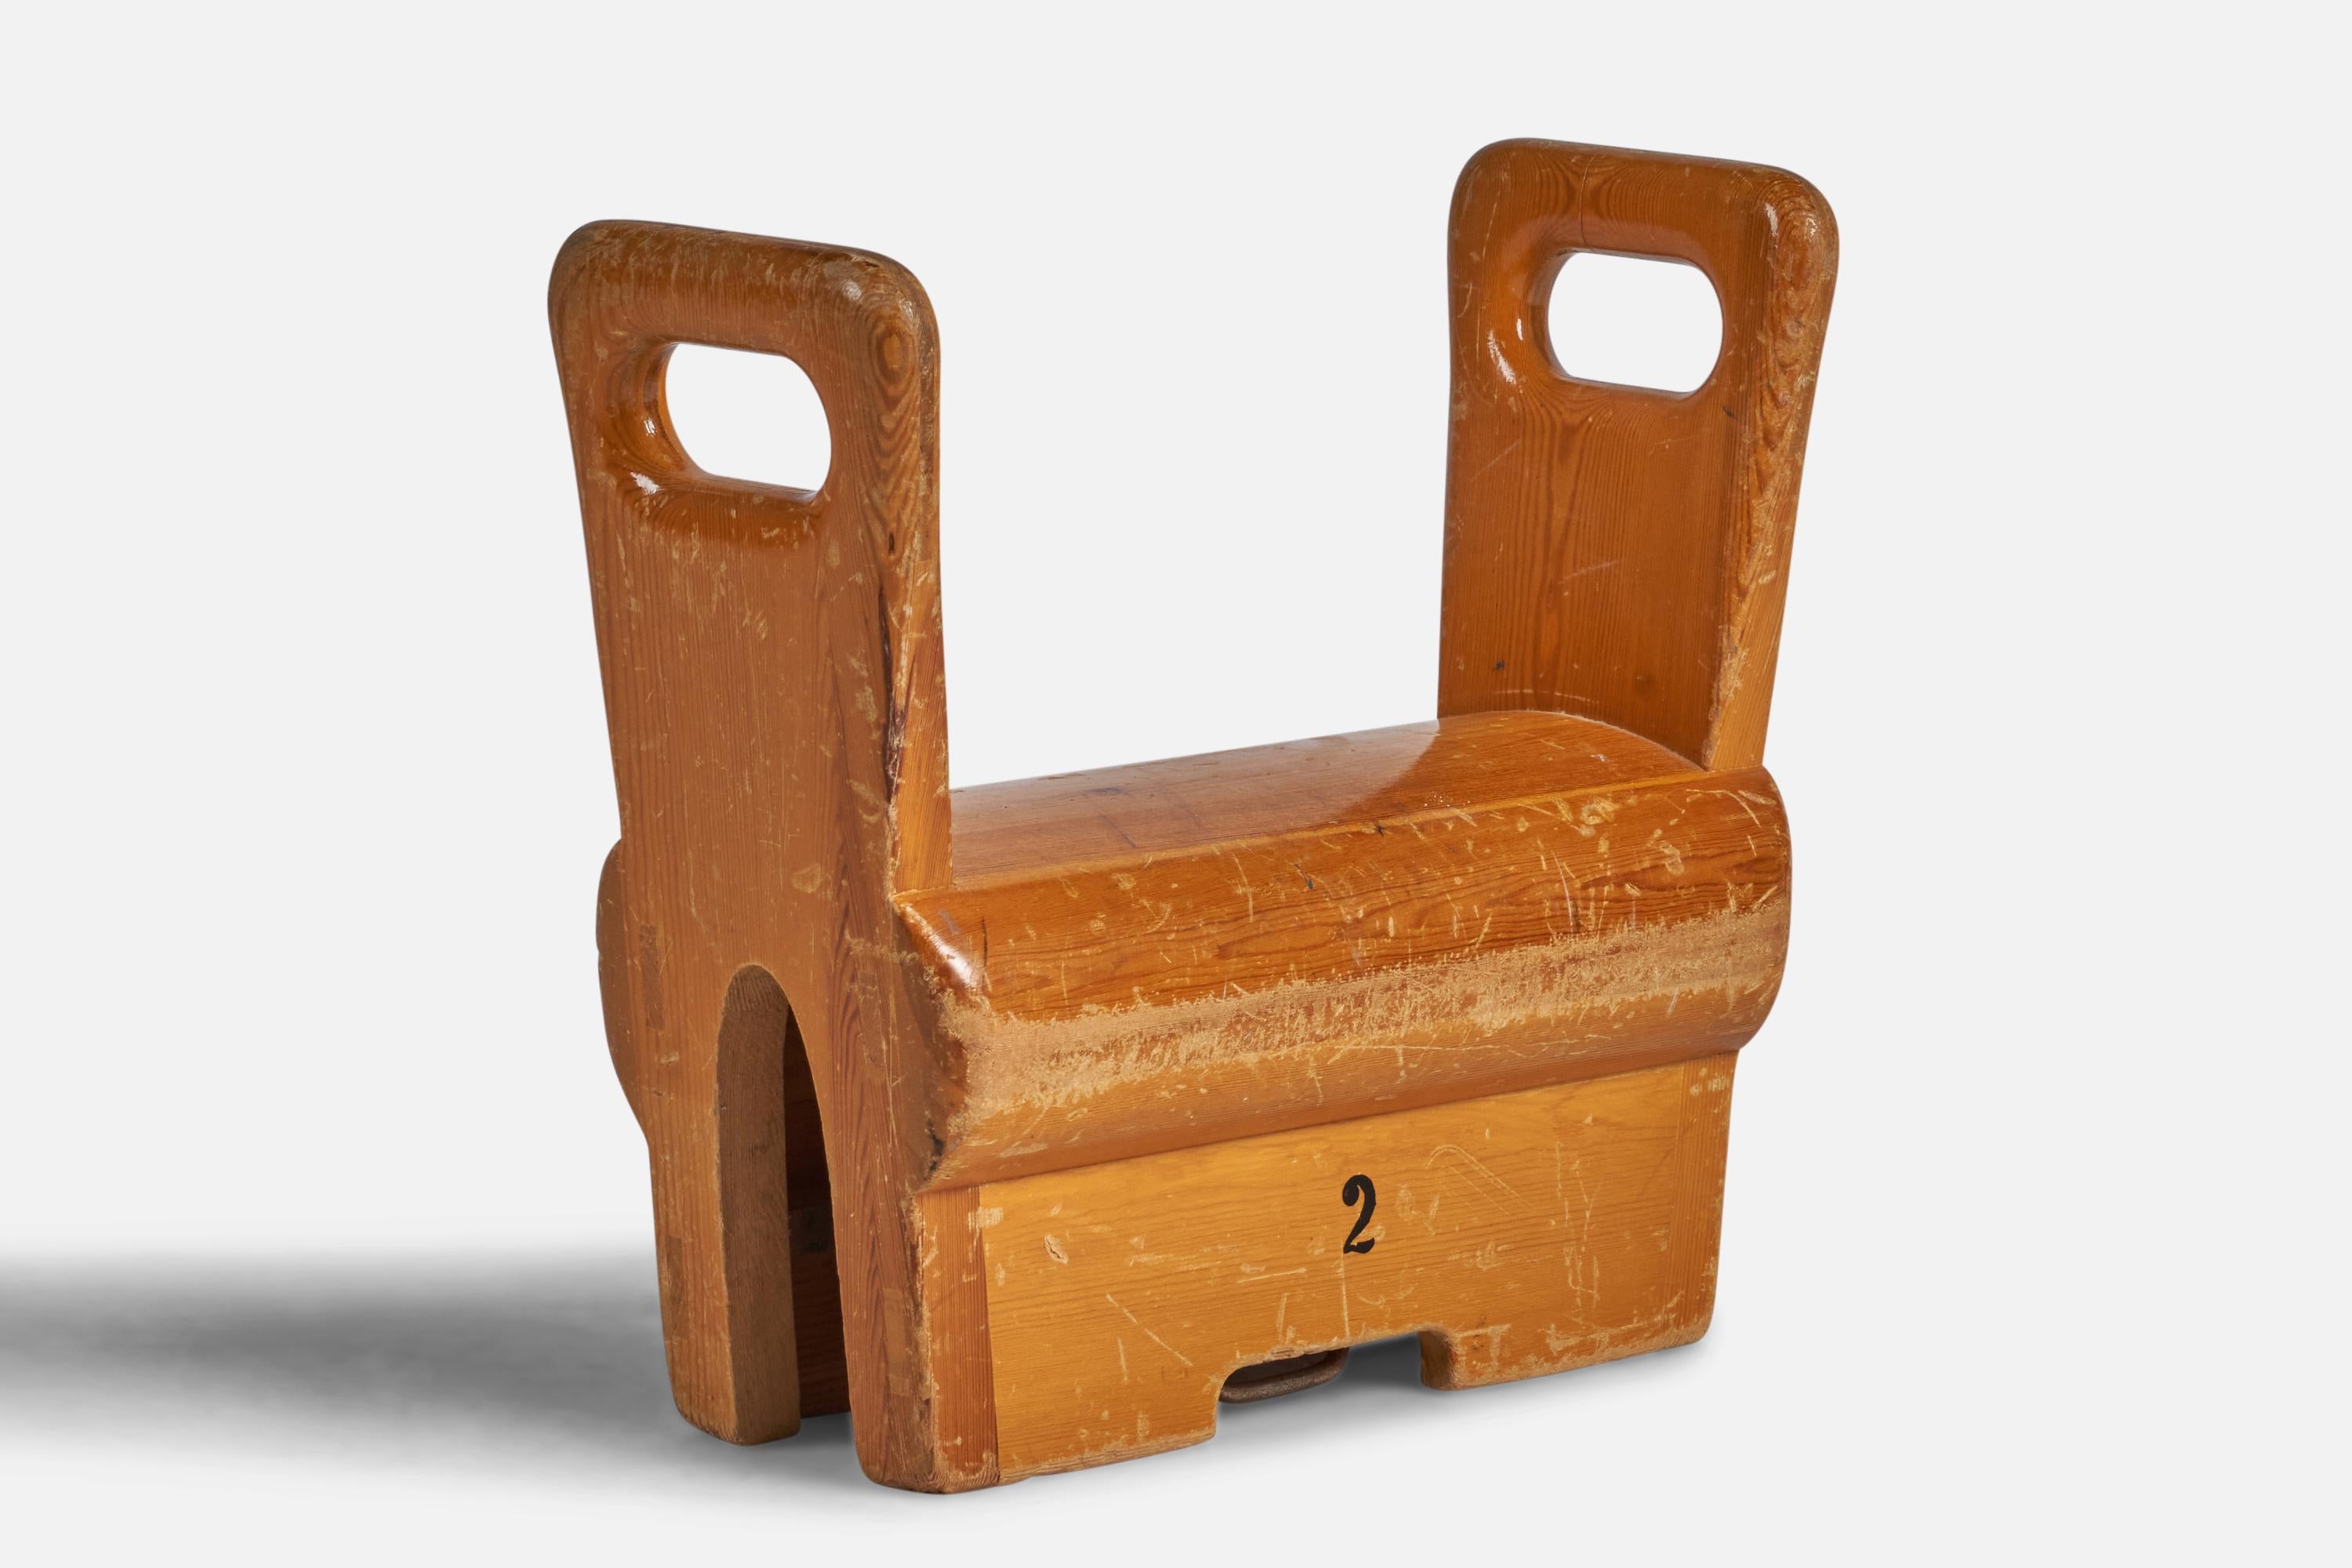 A solid pine Gymnastics Stool designed and produced in Sweden, c. 1950s.
9.25” seat height